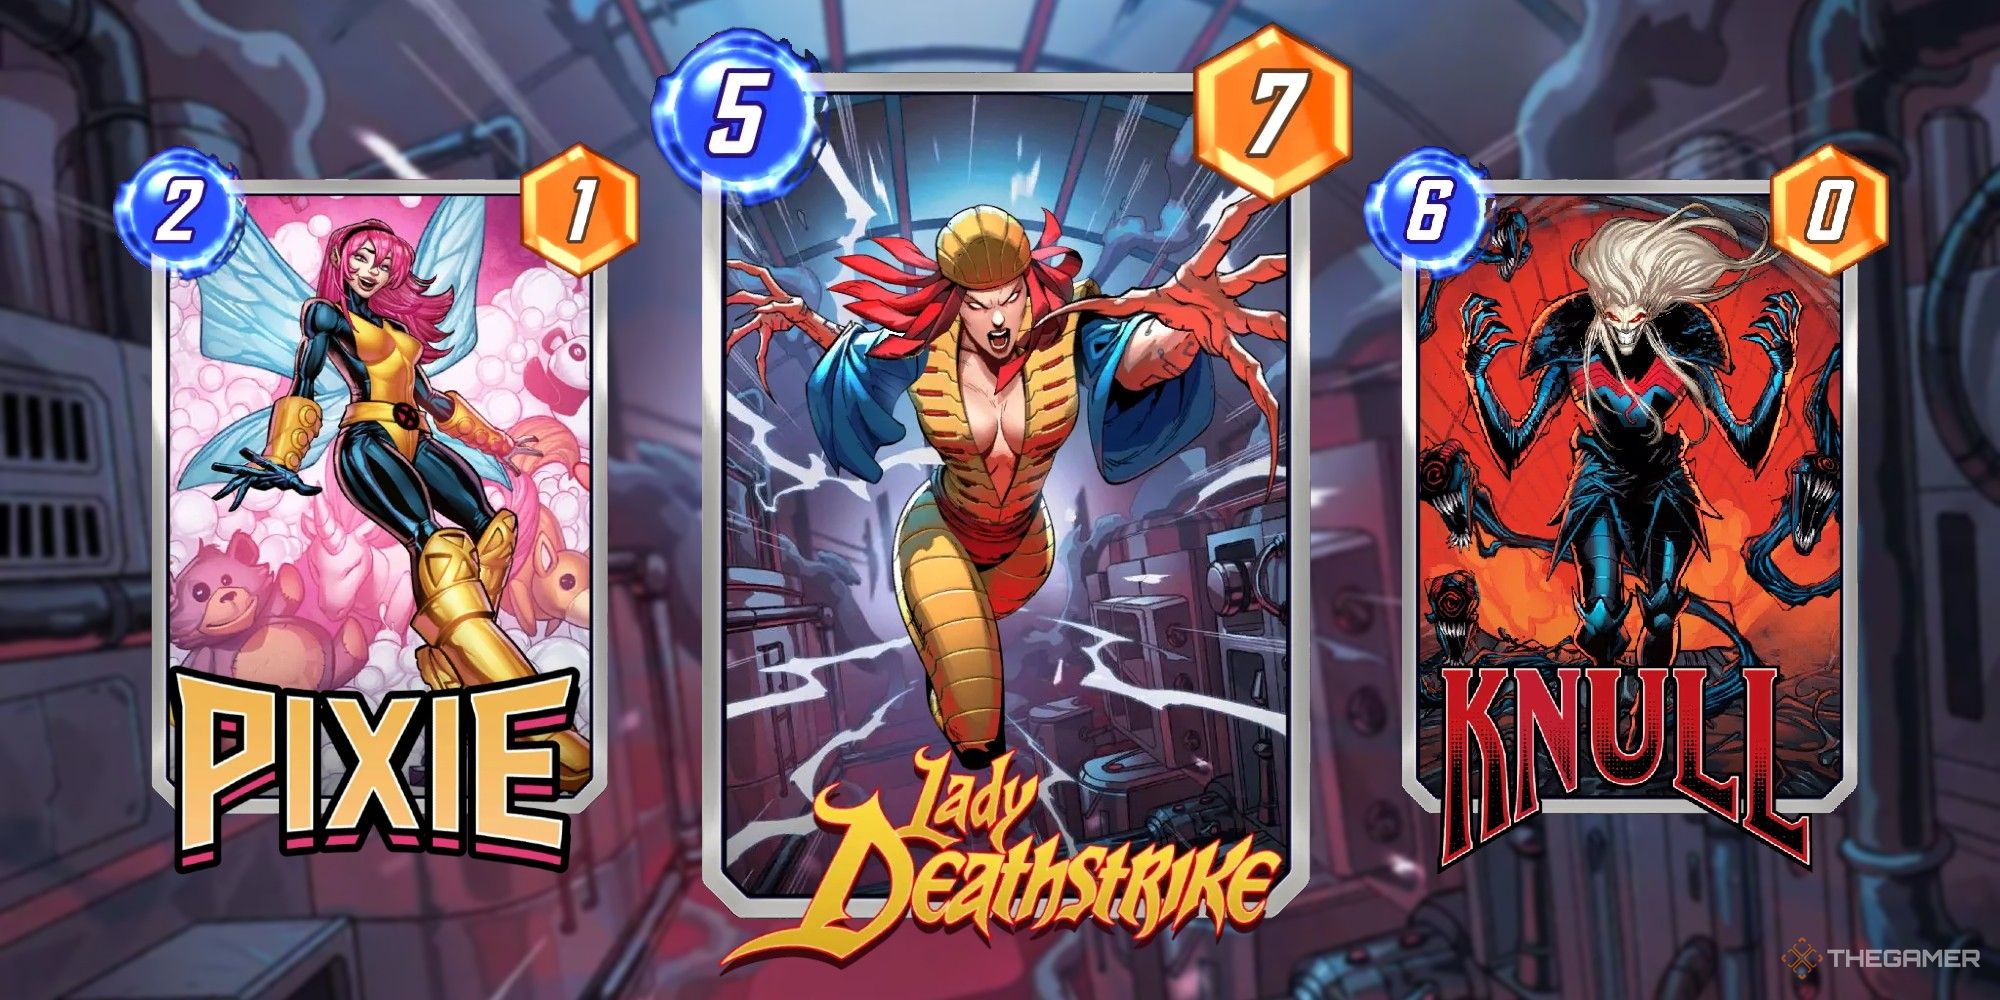 Marvel Snap Cards pixie, lady deathstrike and knull